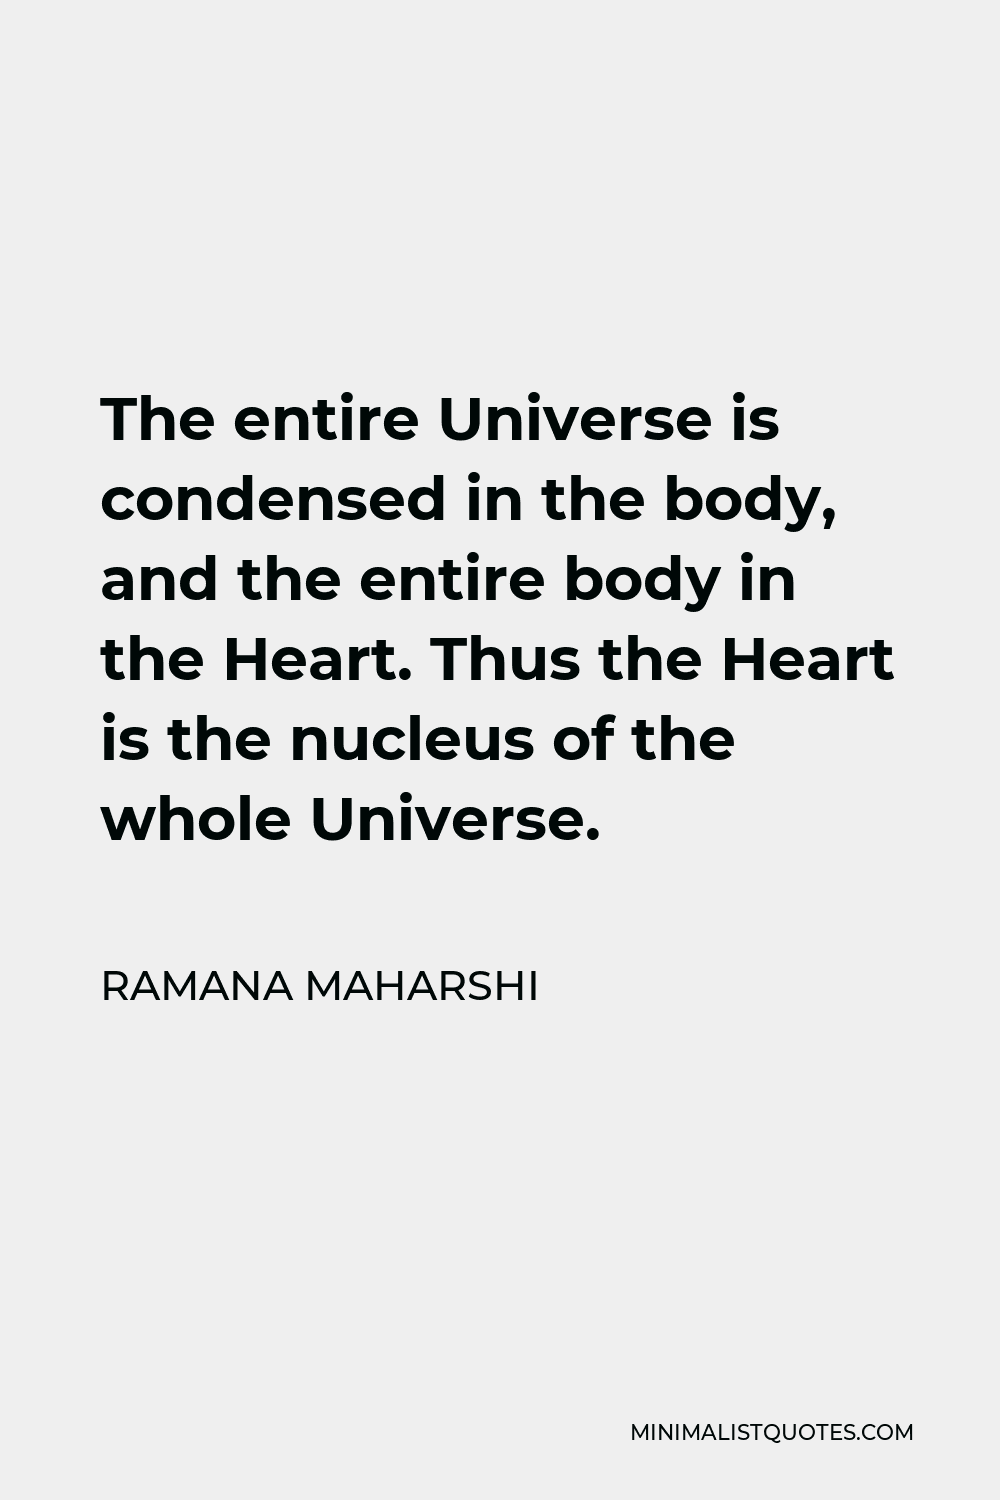 Ramana Maharshi Quote - The entire Universe is condensed in the body, and the entire body in the Heart. Thus the Heart is the nucleus of the whole Universe.